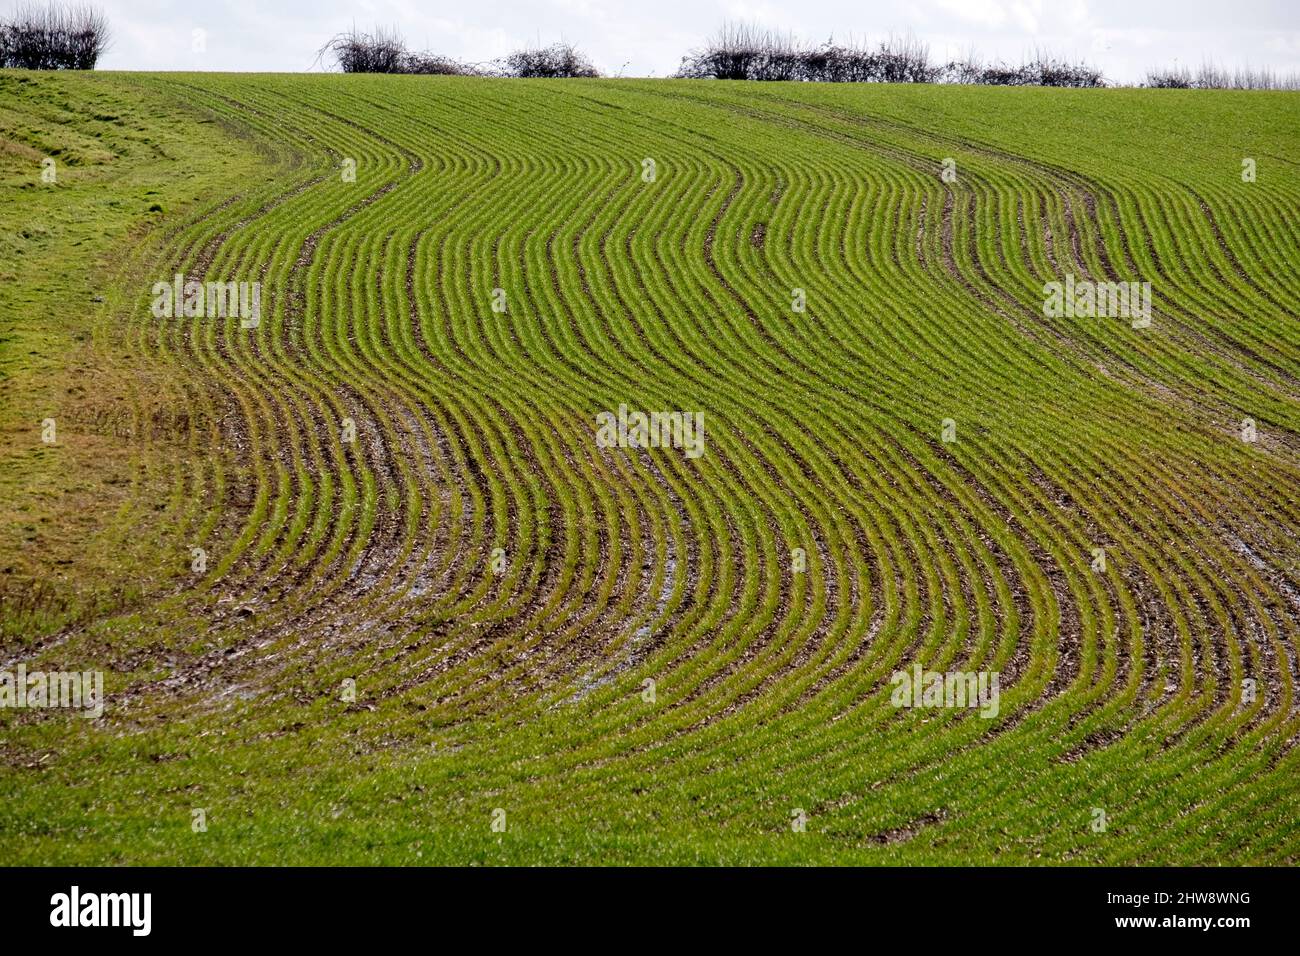 Rows of new plants in a wet farmers field, Warwickshire, ENgland. Stock Photo